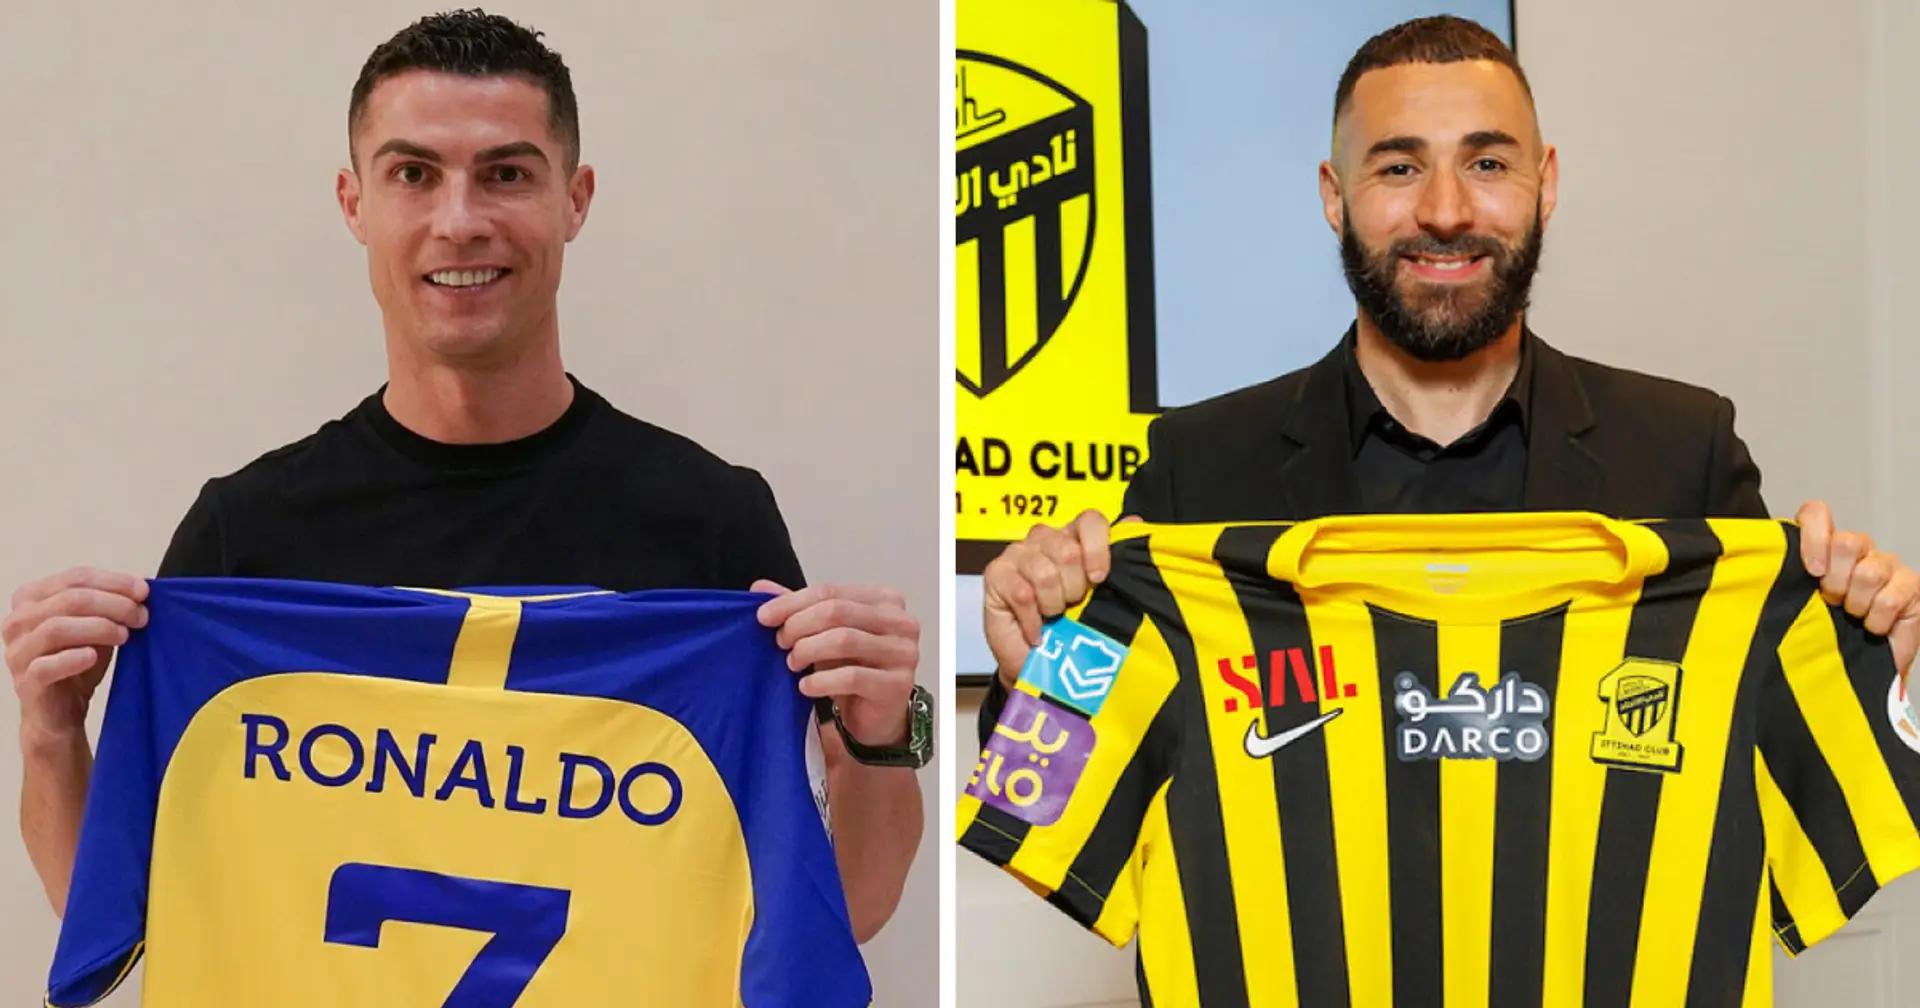 'You're on the last legs of your footballing career': Man Utd legend Ronaldo and Benzema’s Saudi Pro League moves